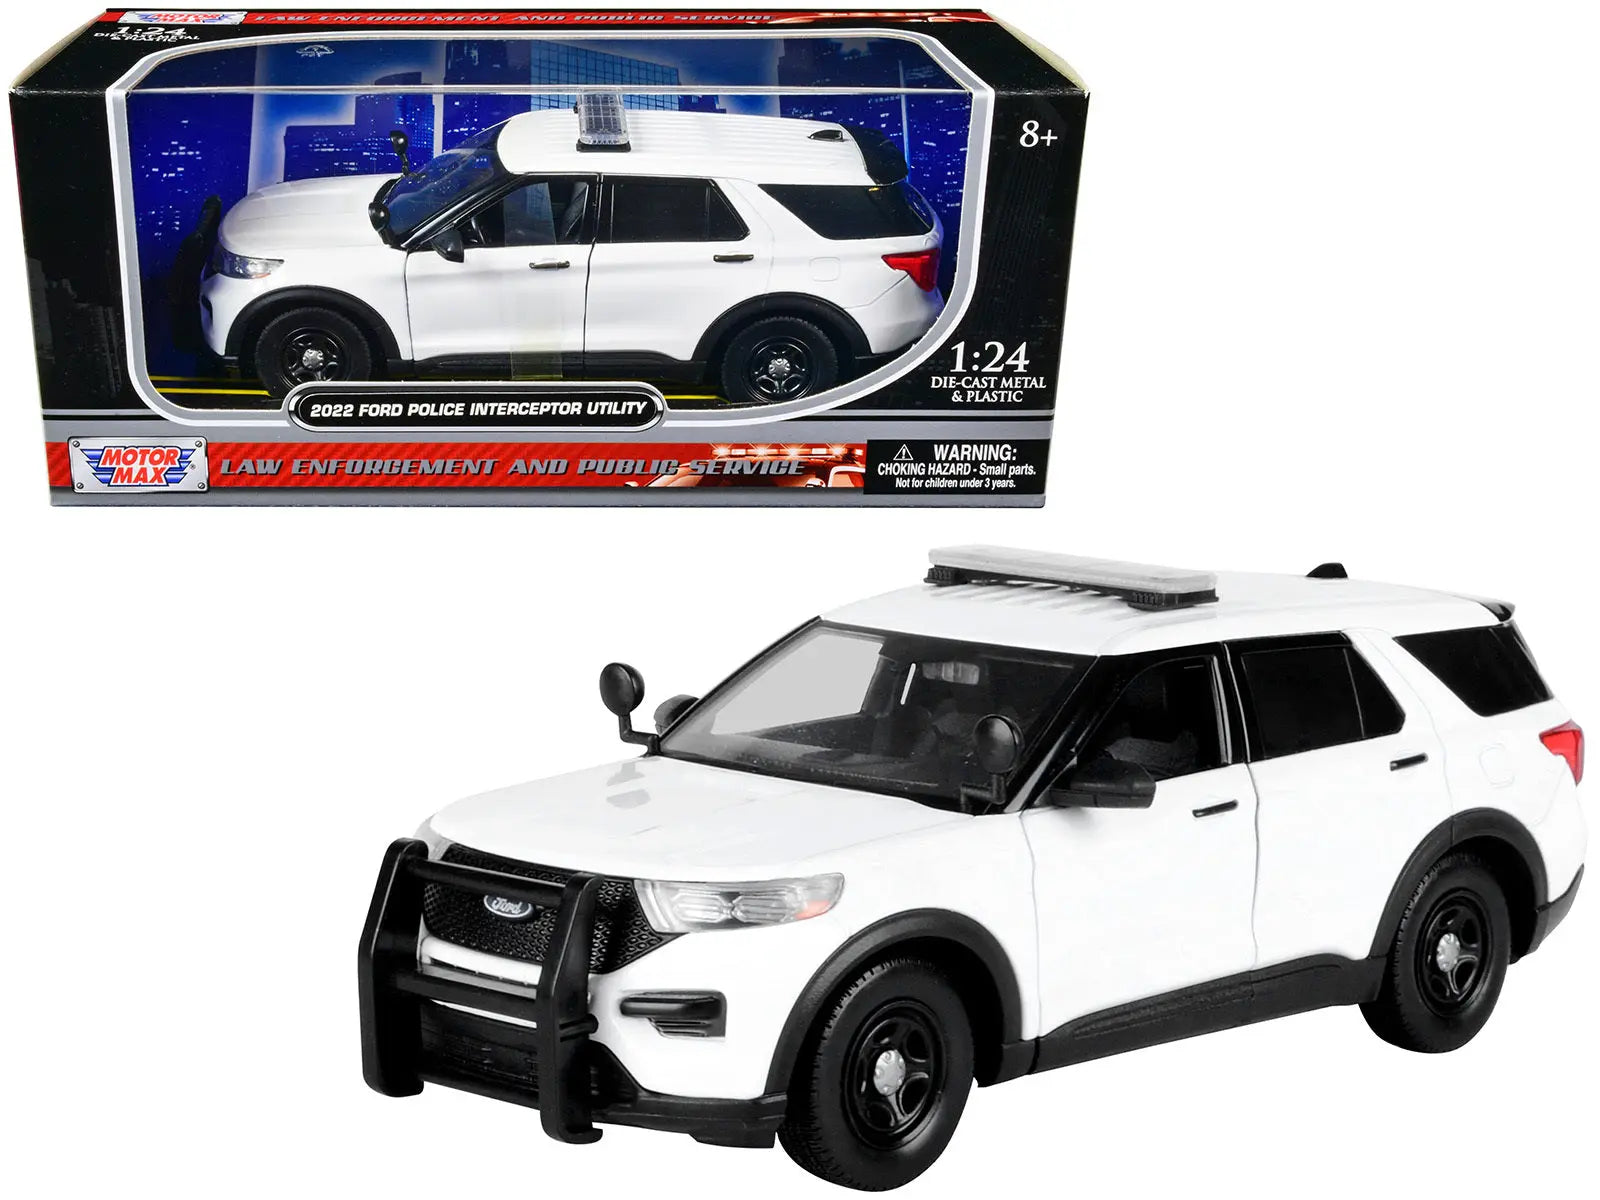 2022 Ford Police Interceptor Utility Unmarked White 1/24 Diecast Model Car by Motormax Motormax